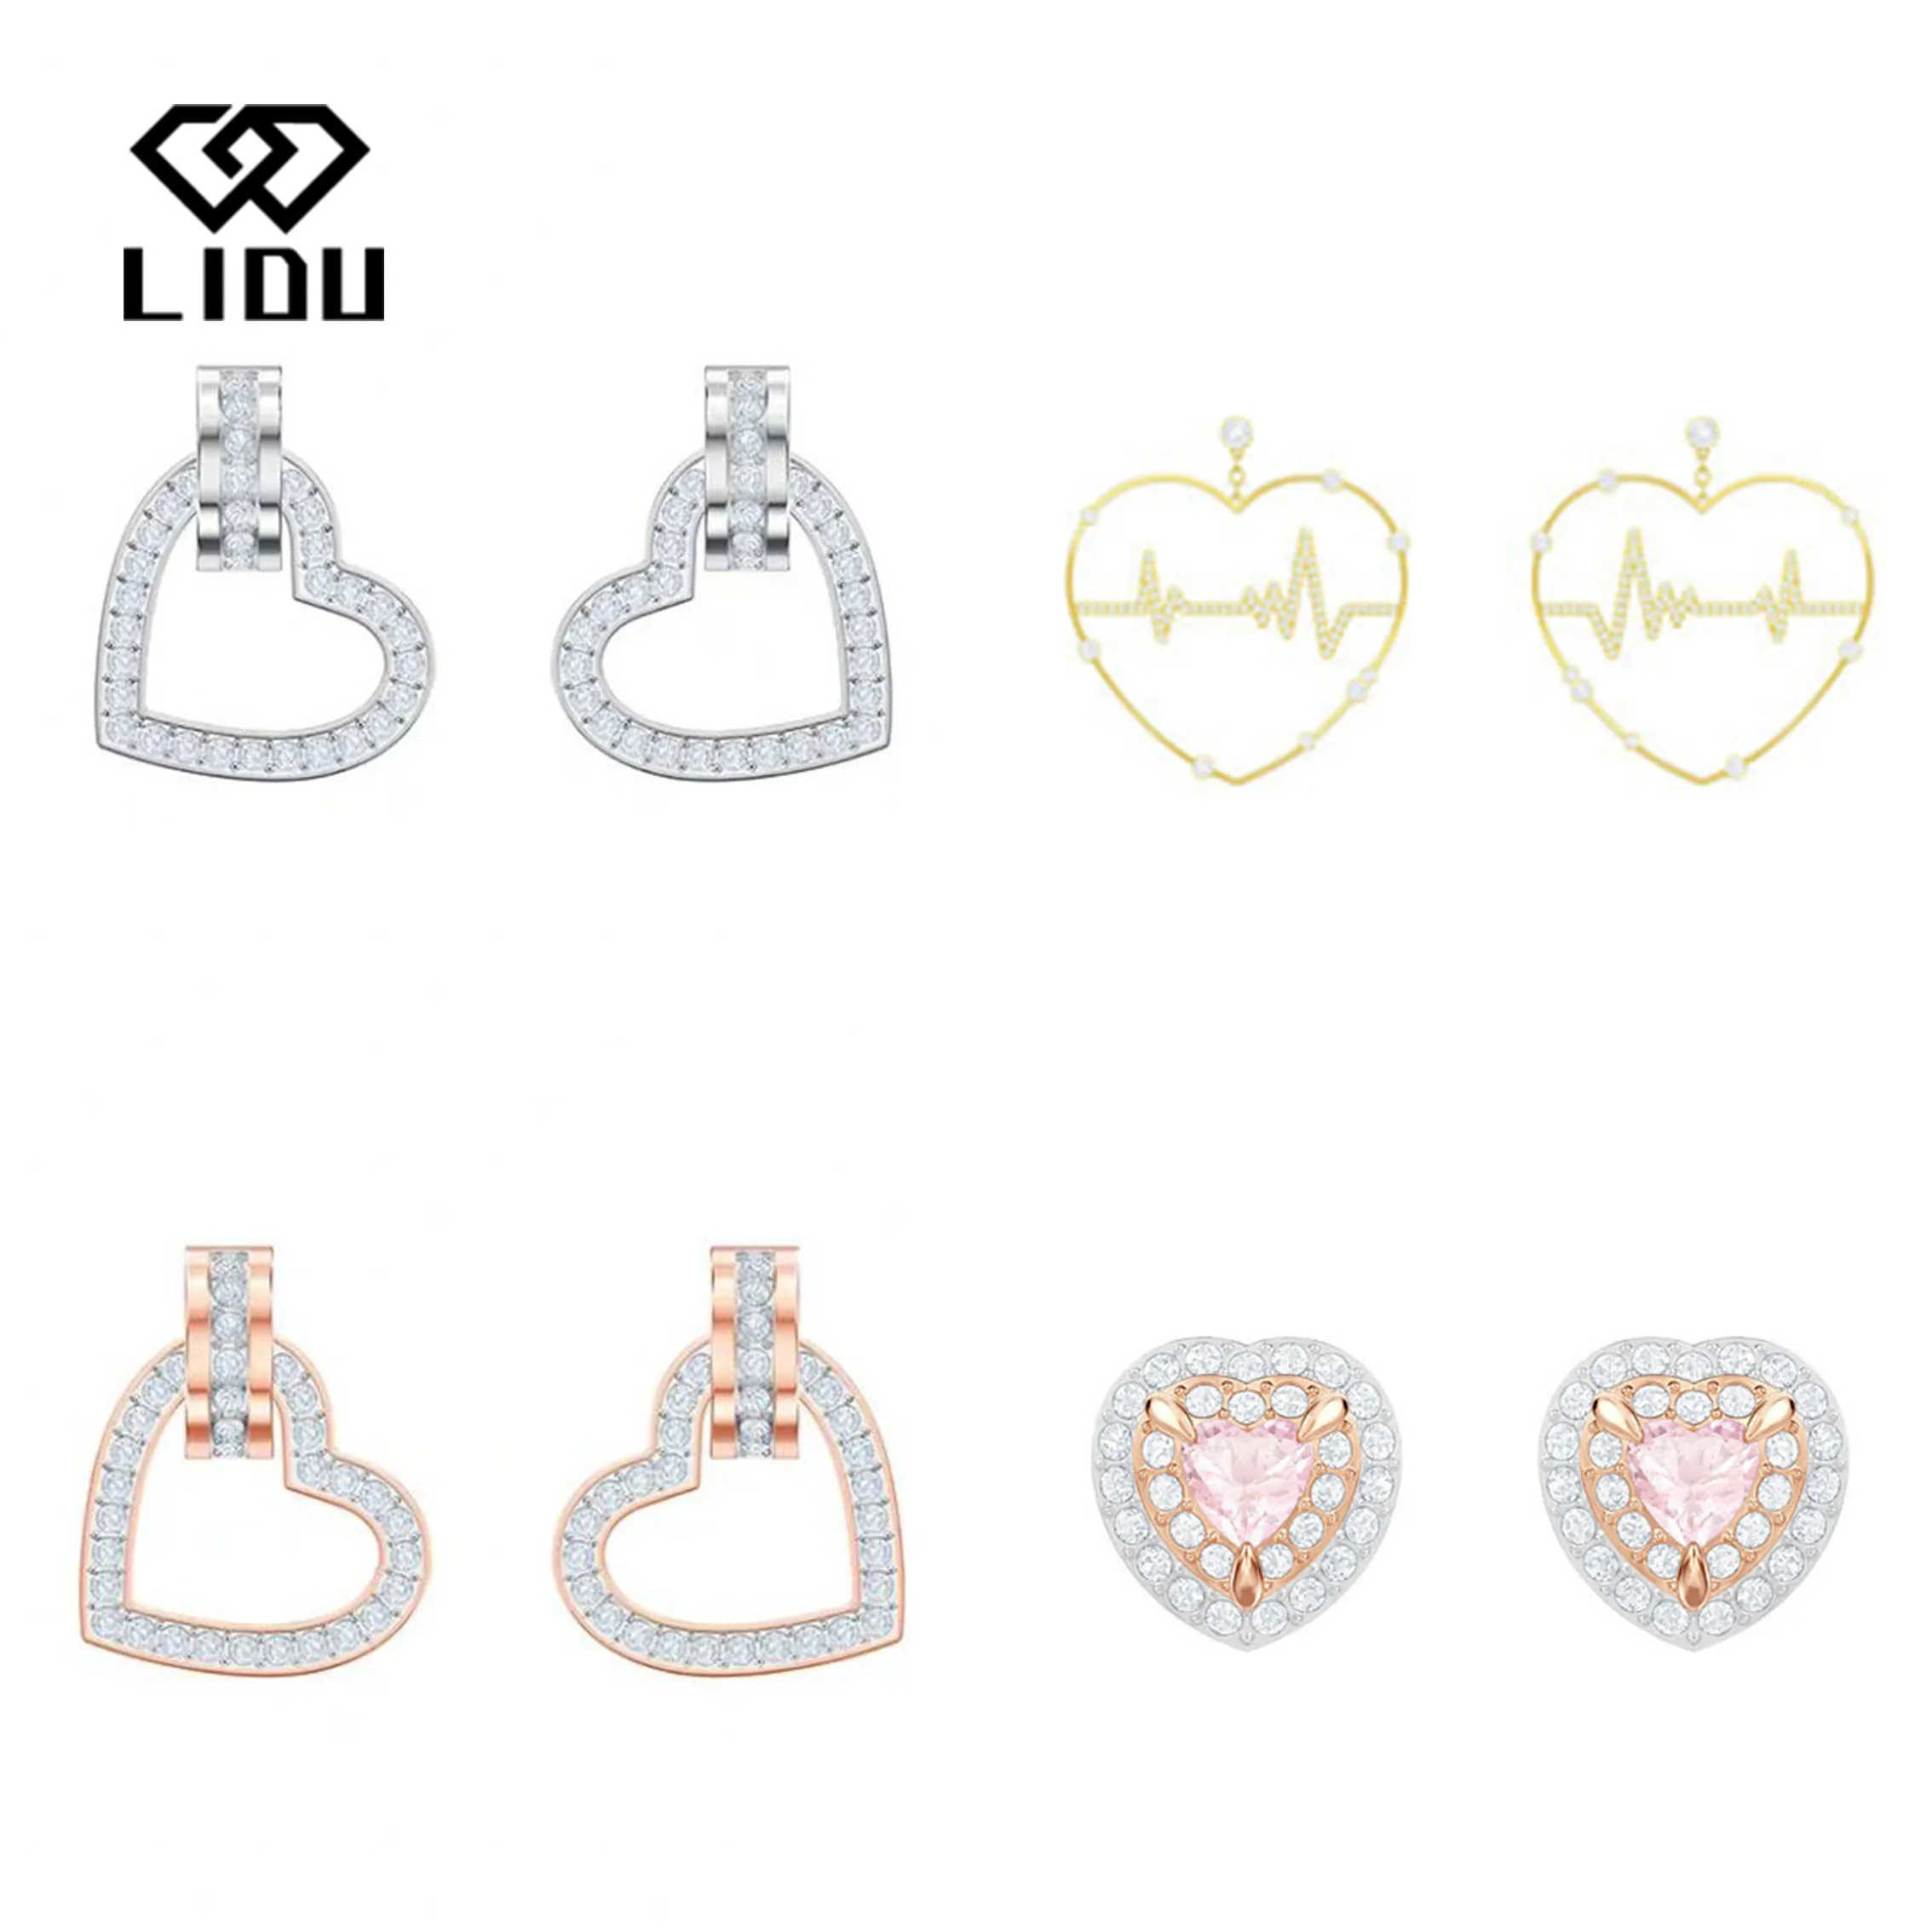 

LIDU High Quality Exquisite Fashion Heart Shaped Stud Earrings Send Free Gift To Friends By Mail Manufacturers Wholesale